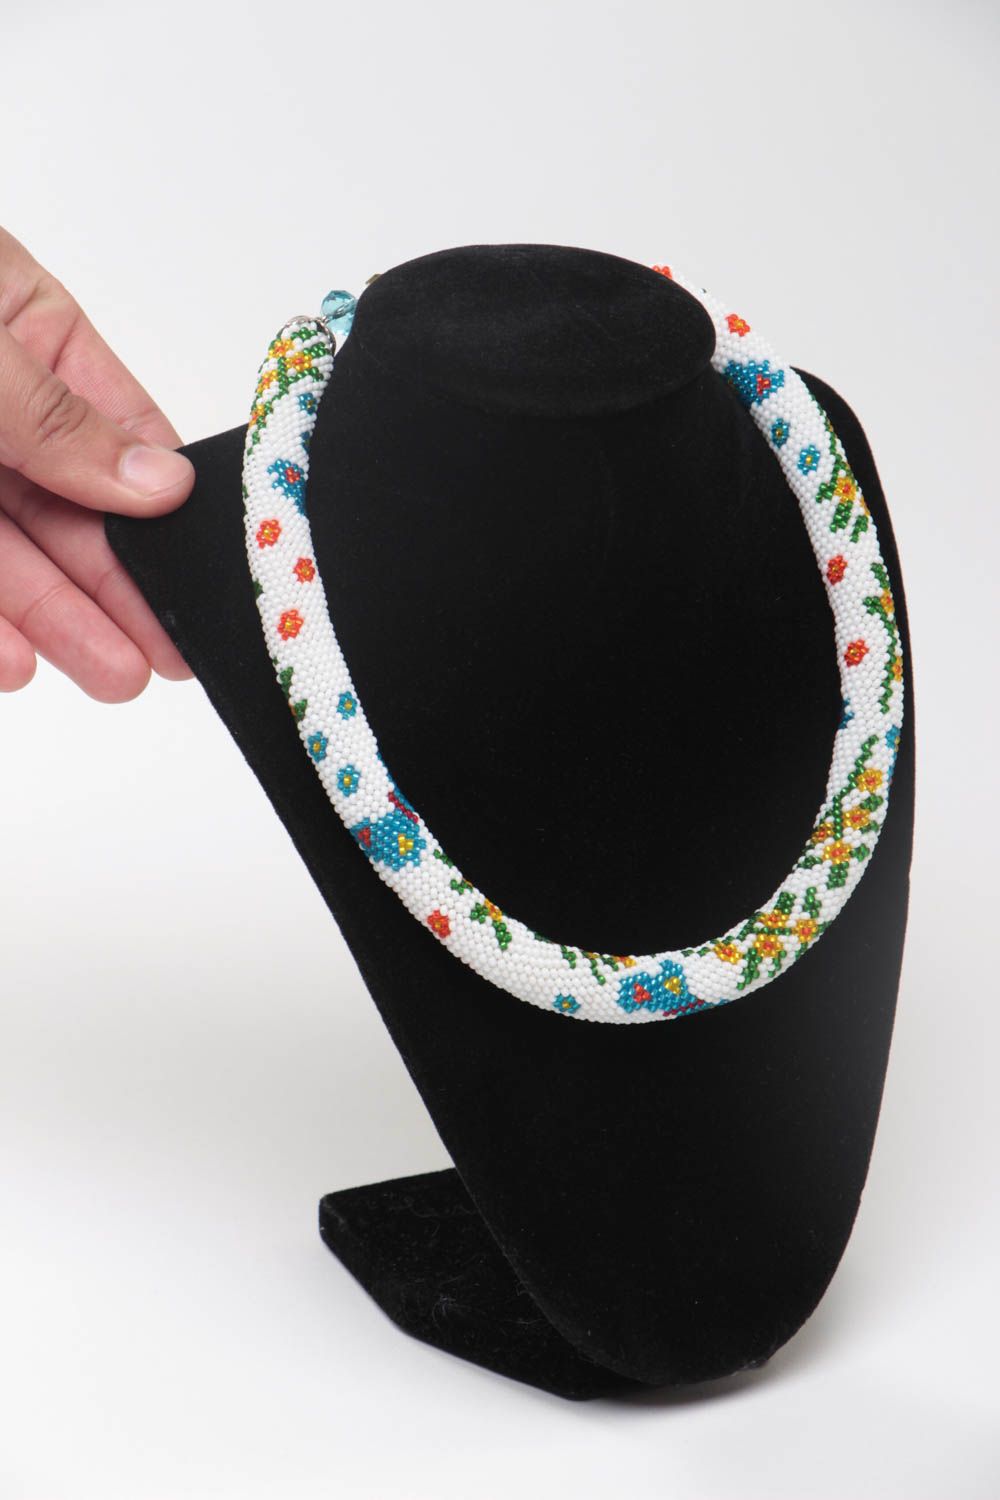 Handmade white beaded cord necklace with stylish colorful inserts for women photo 5